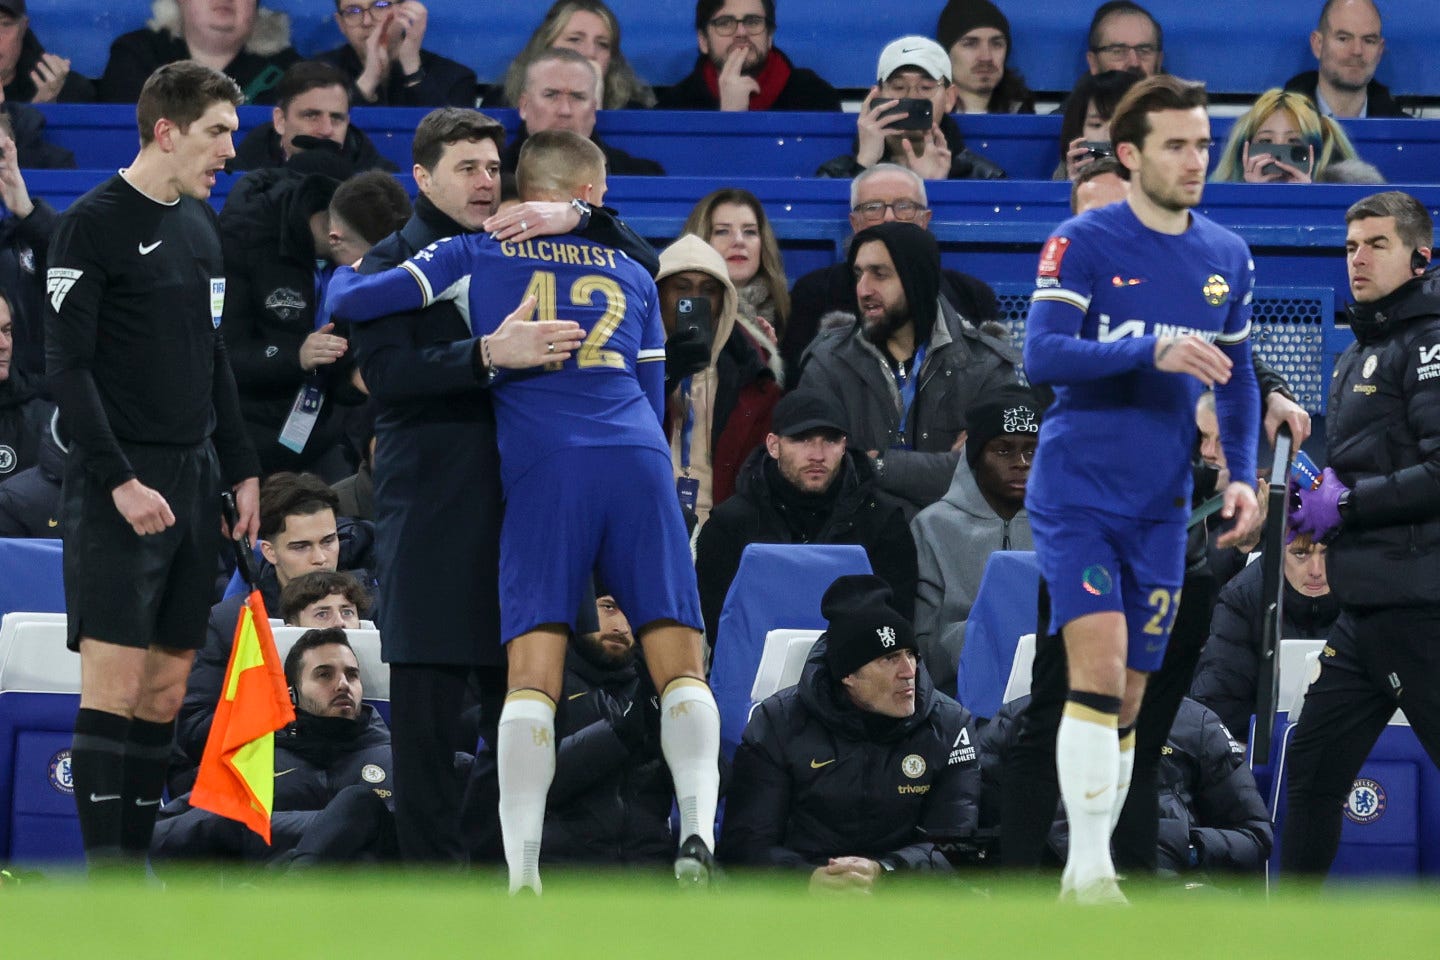 Pochettino praises Petrovic and Gilchrist, plus updates on Colwill injury |  News | Official Site | Chelsea Football Club